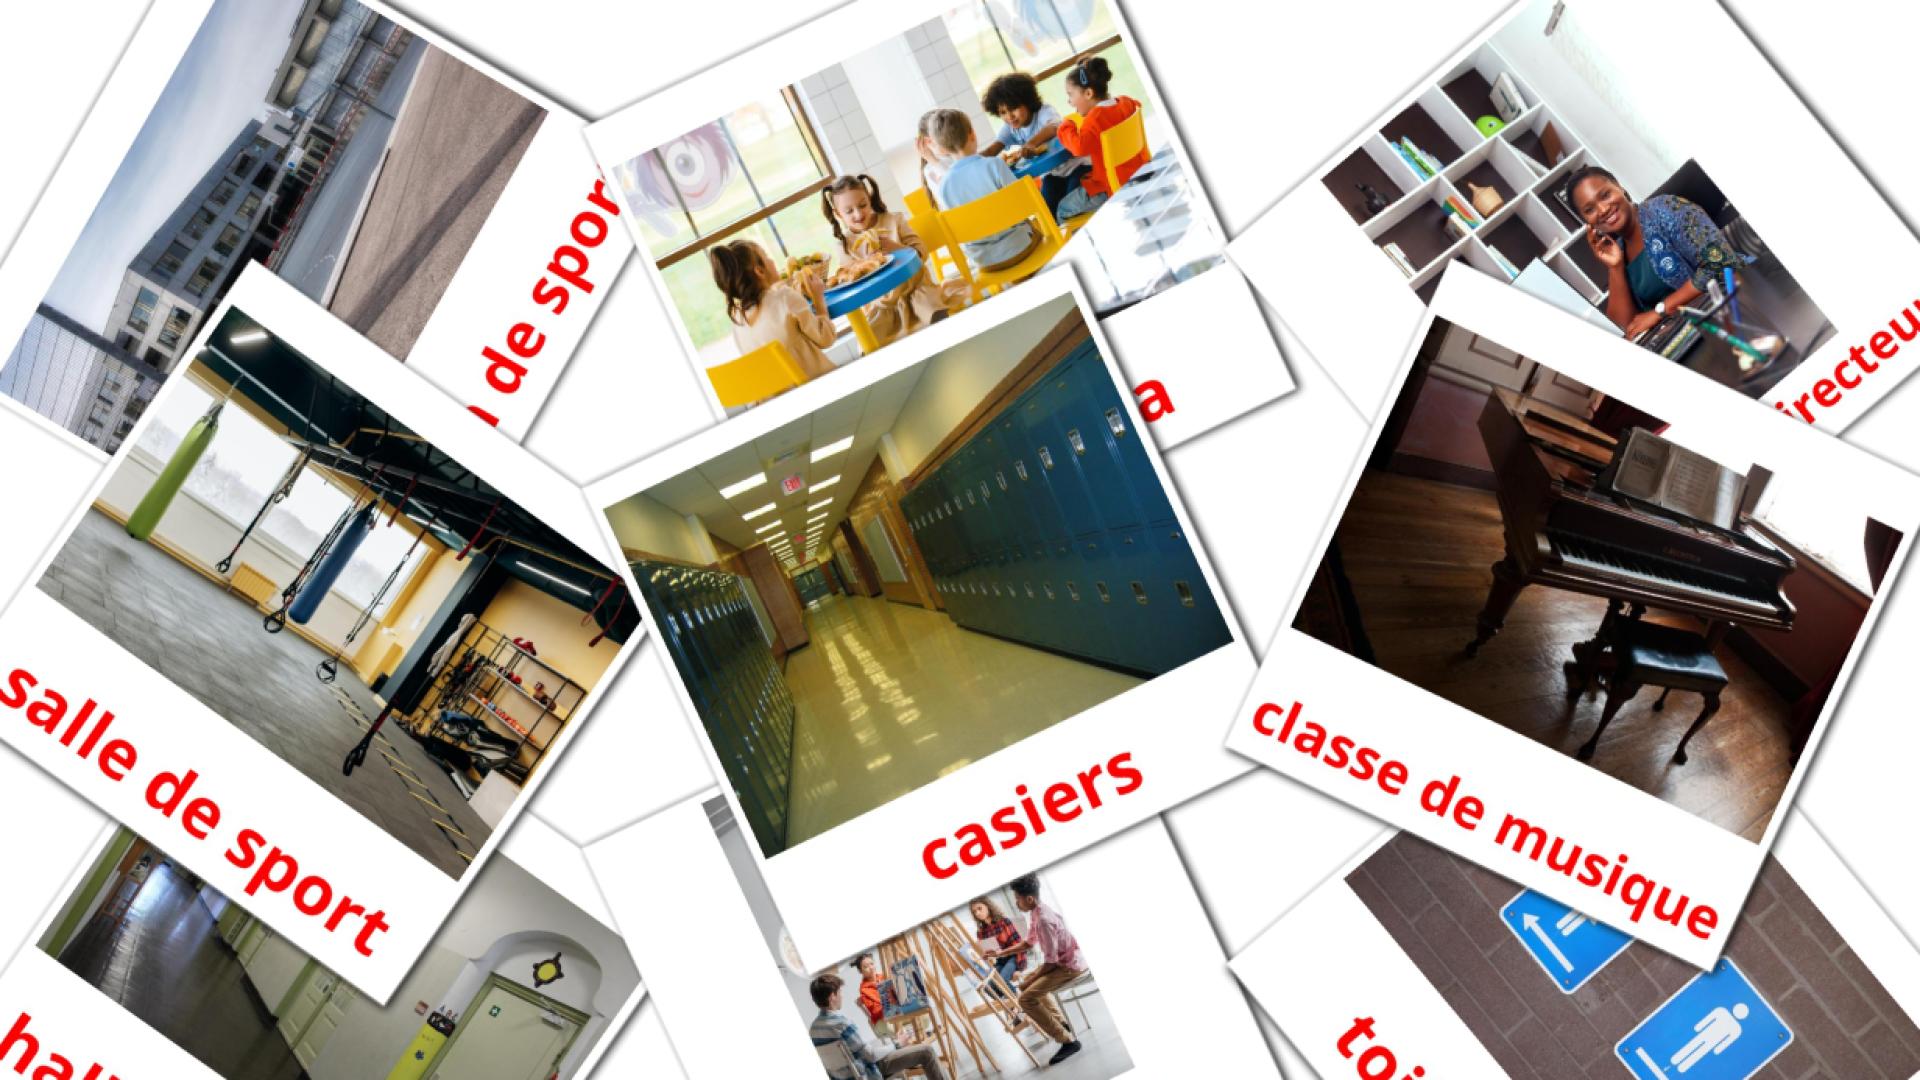 School building - french vocabulary cards